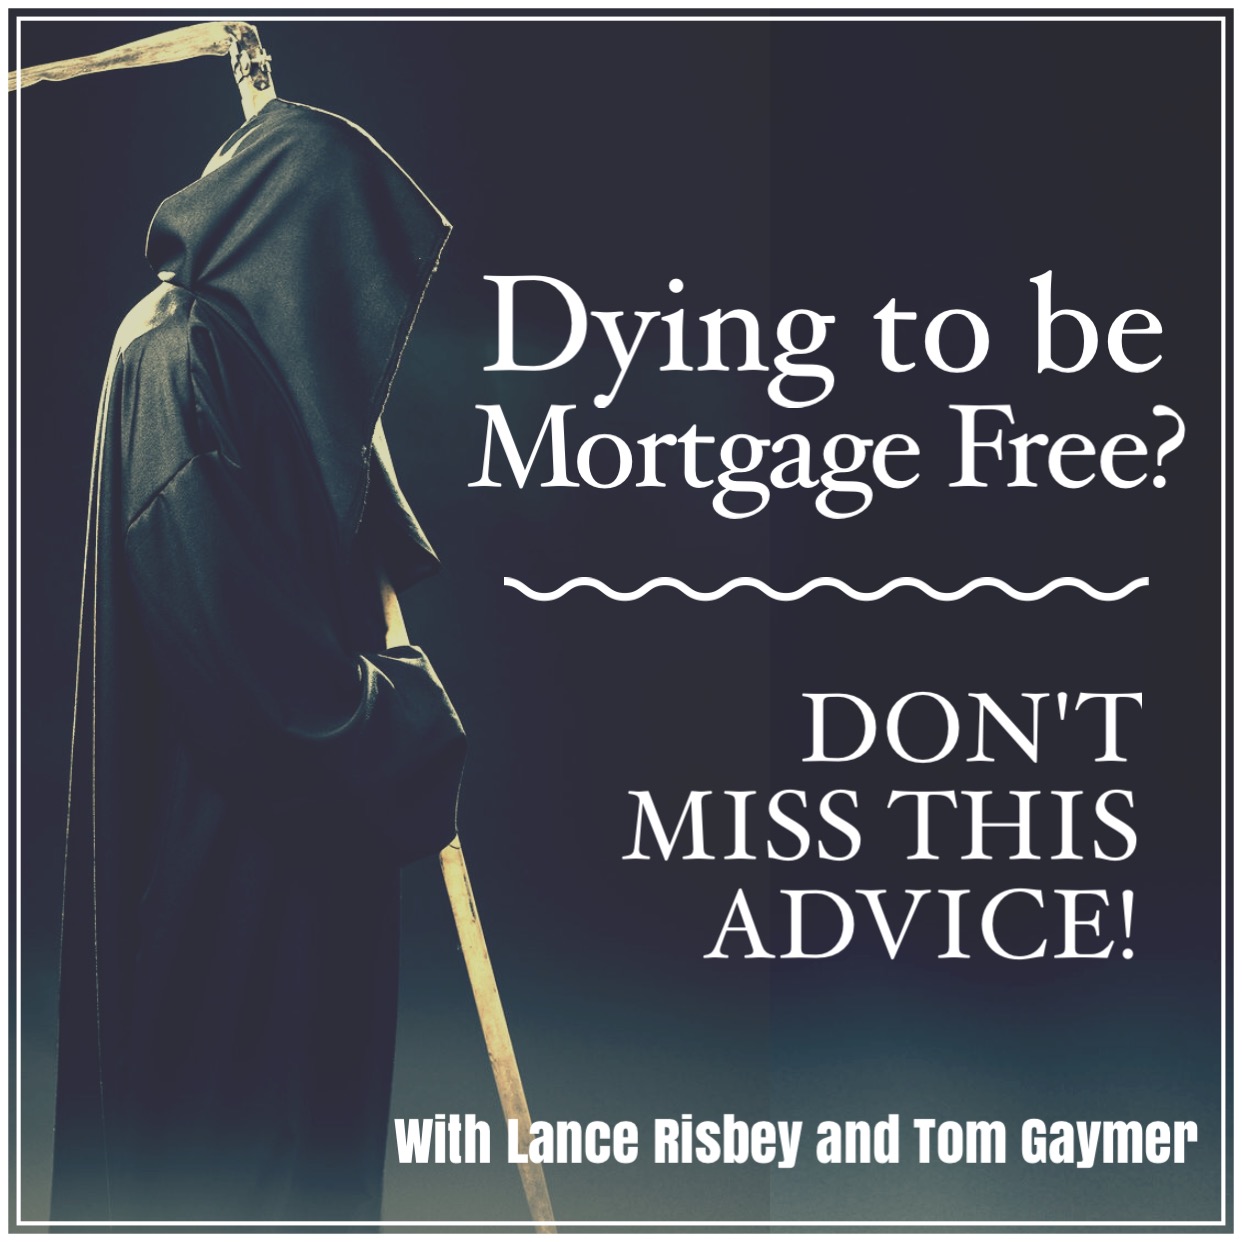 Dying to be Mortgage Free?